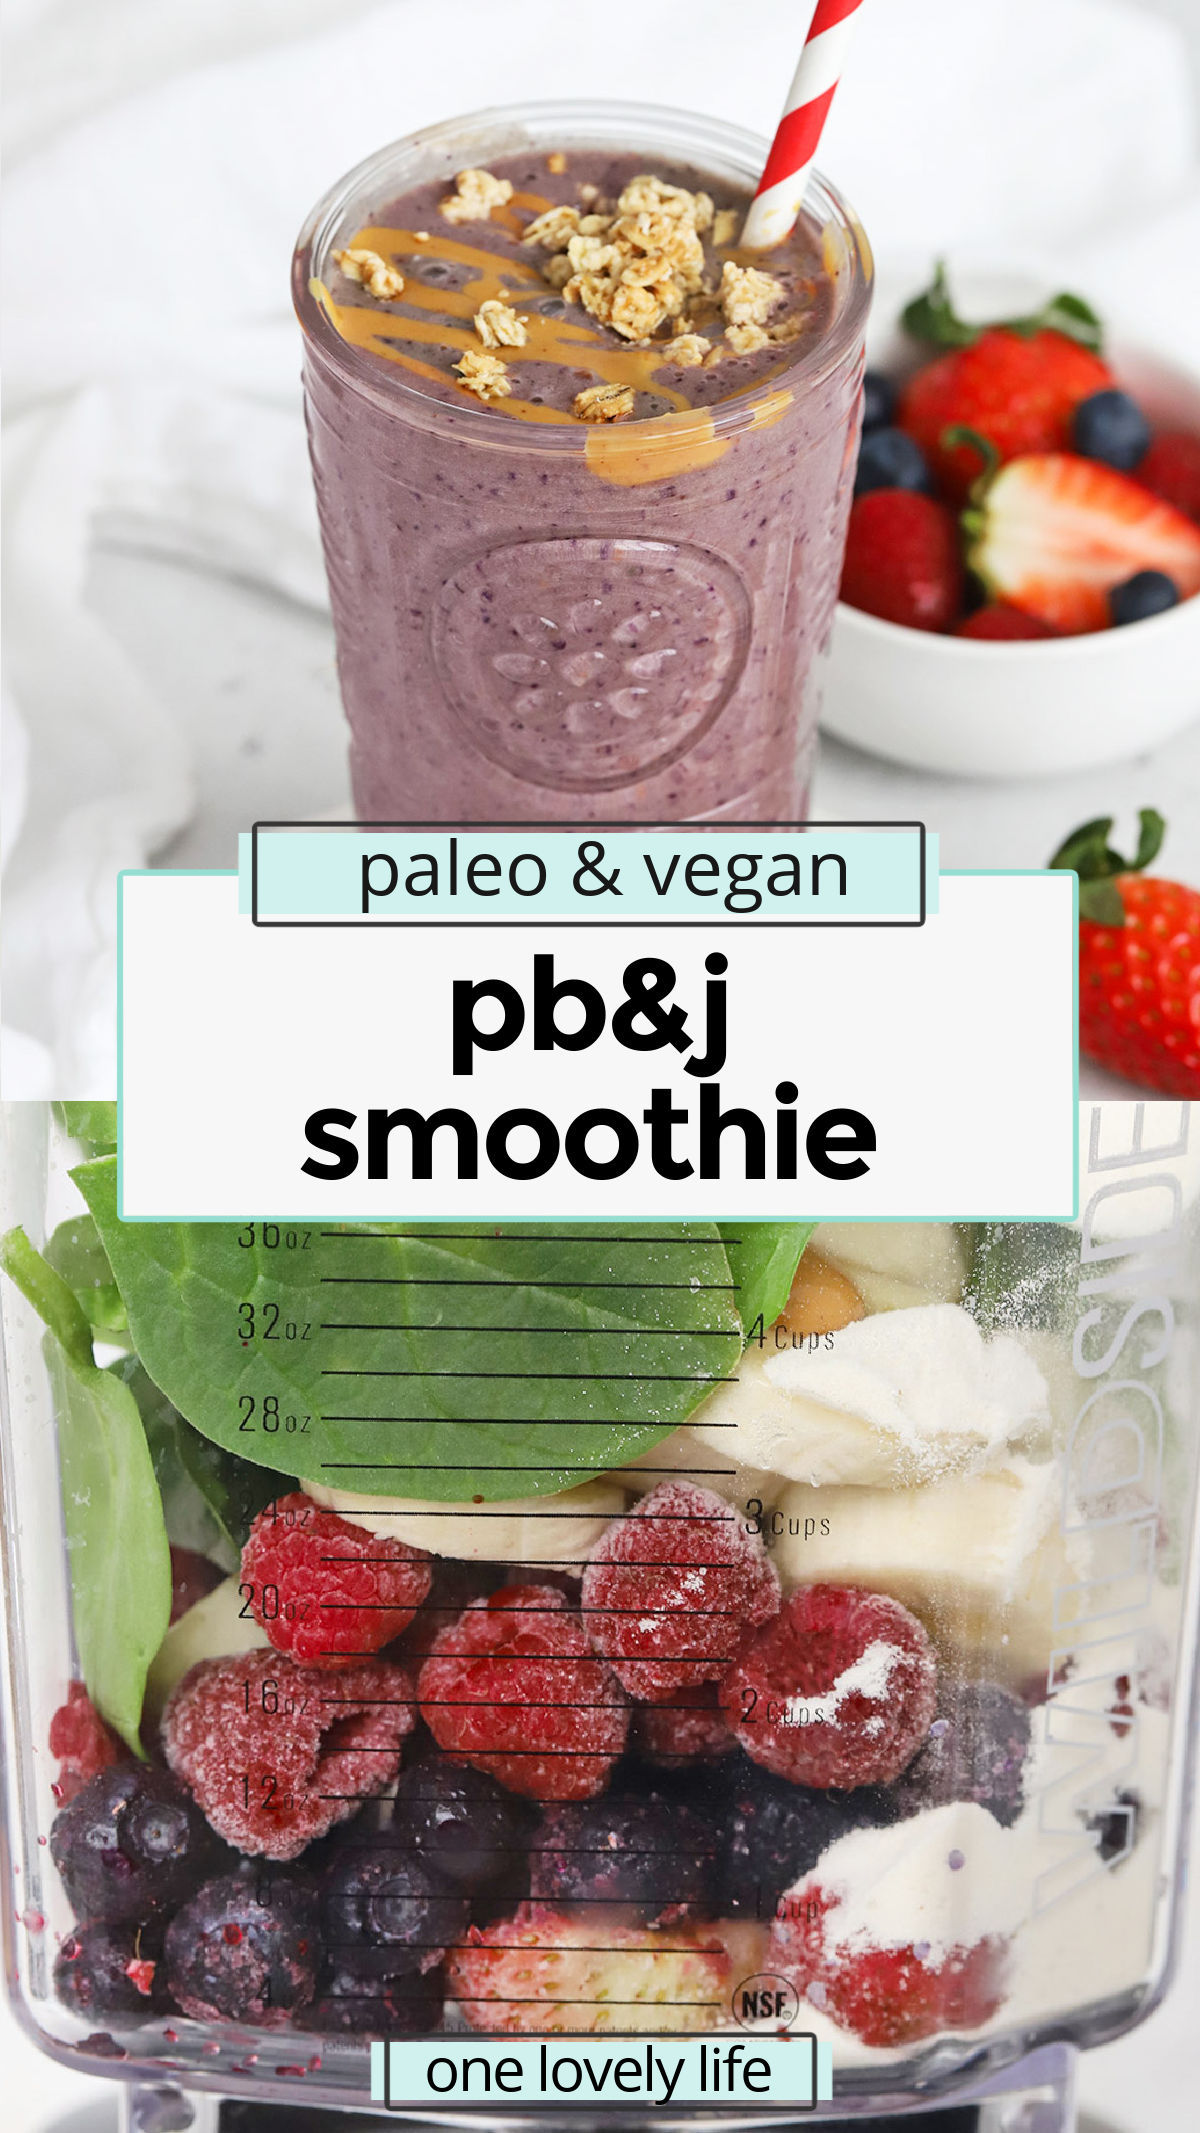 Peanut Butter Jelly Smoothie - We channeled these classic sandwich flavors into a PBJ smoothie! With ripe berries and creamy peanut butter, you'll love this satisfying smoothie recipe. (Gluten-Free, Vegan-Friendly) // pb&j smoothies // pb & j smoothies // almond butter and berry smoothie // peanut butter berry smoothie // vegan smoothie // healthy smoothie // paleo smoothie // peanut butter smoothies // berry smoothies